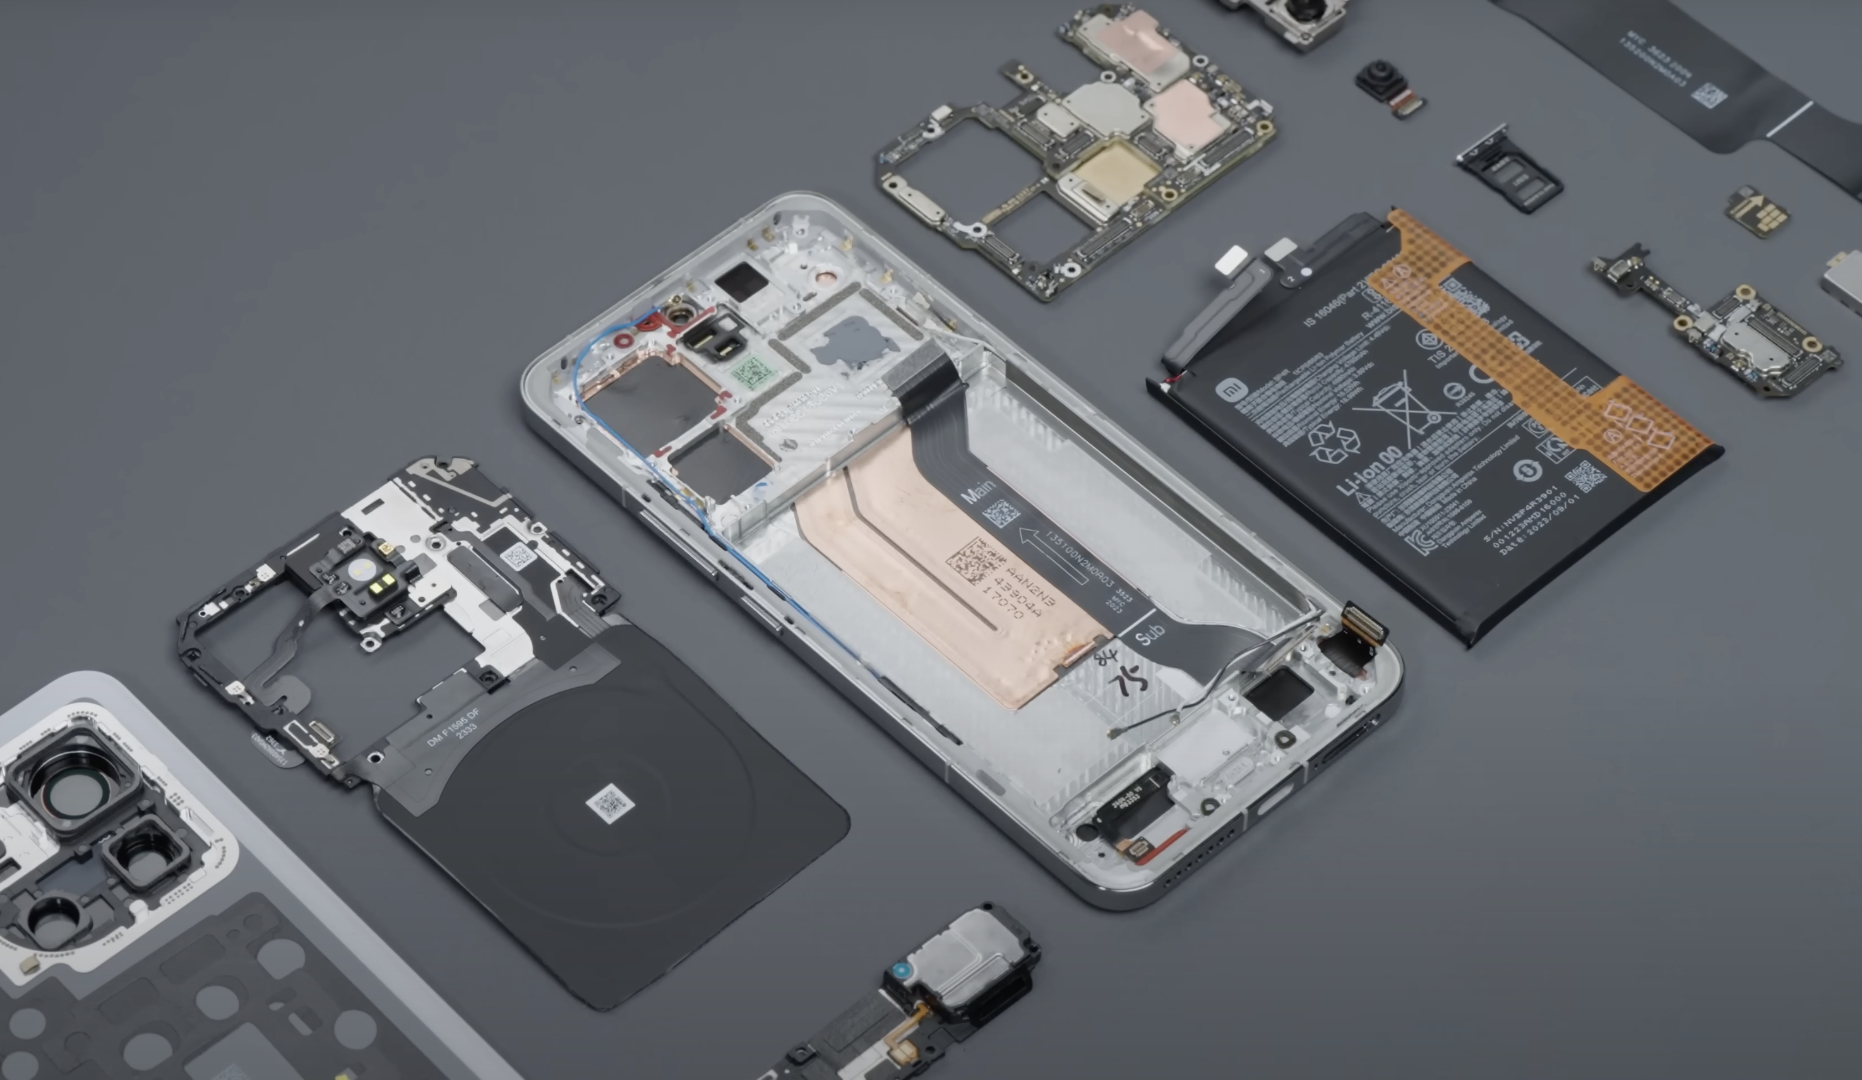 Xiaomi 14 Pro: the first teardown video shows the new camera with continuously variable aperture and other new hardware features